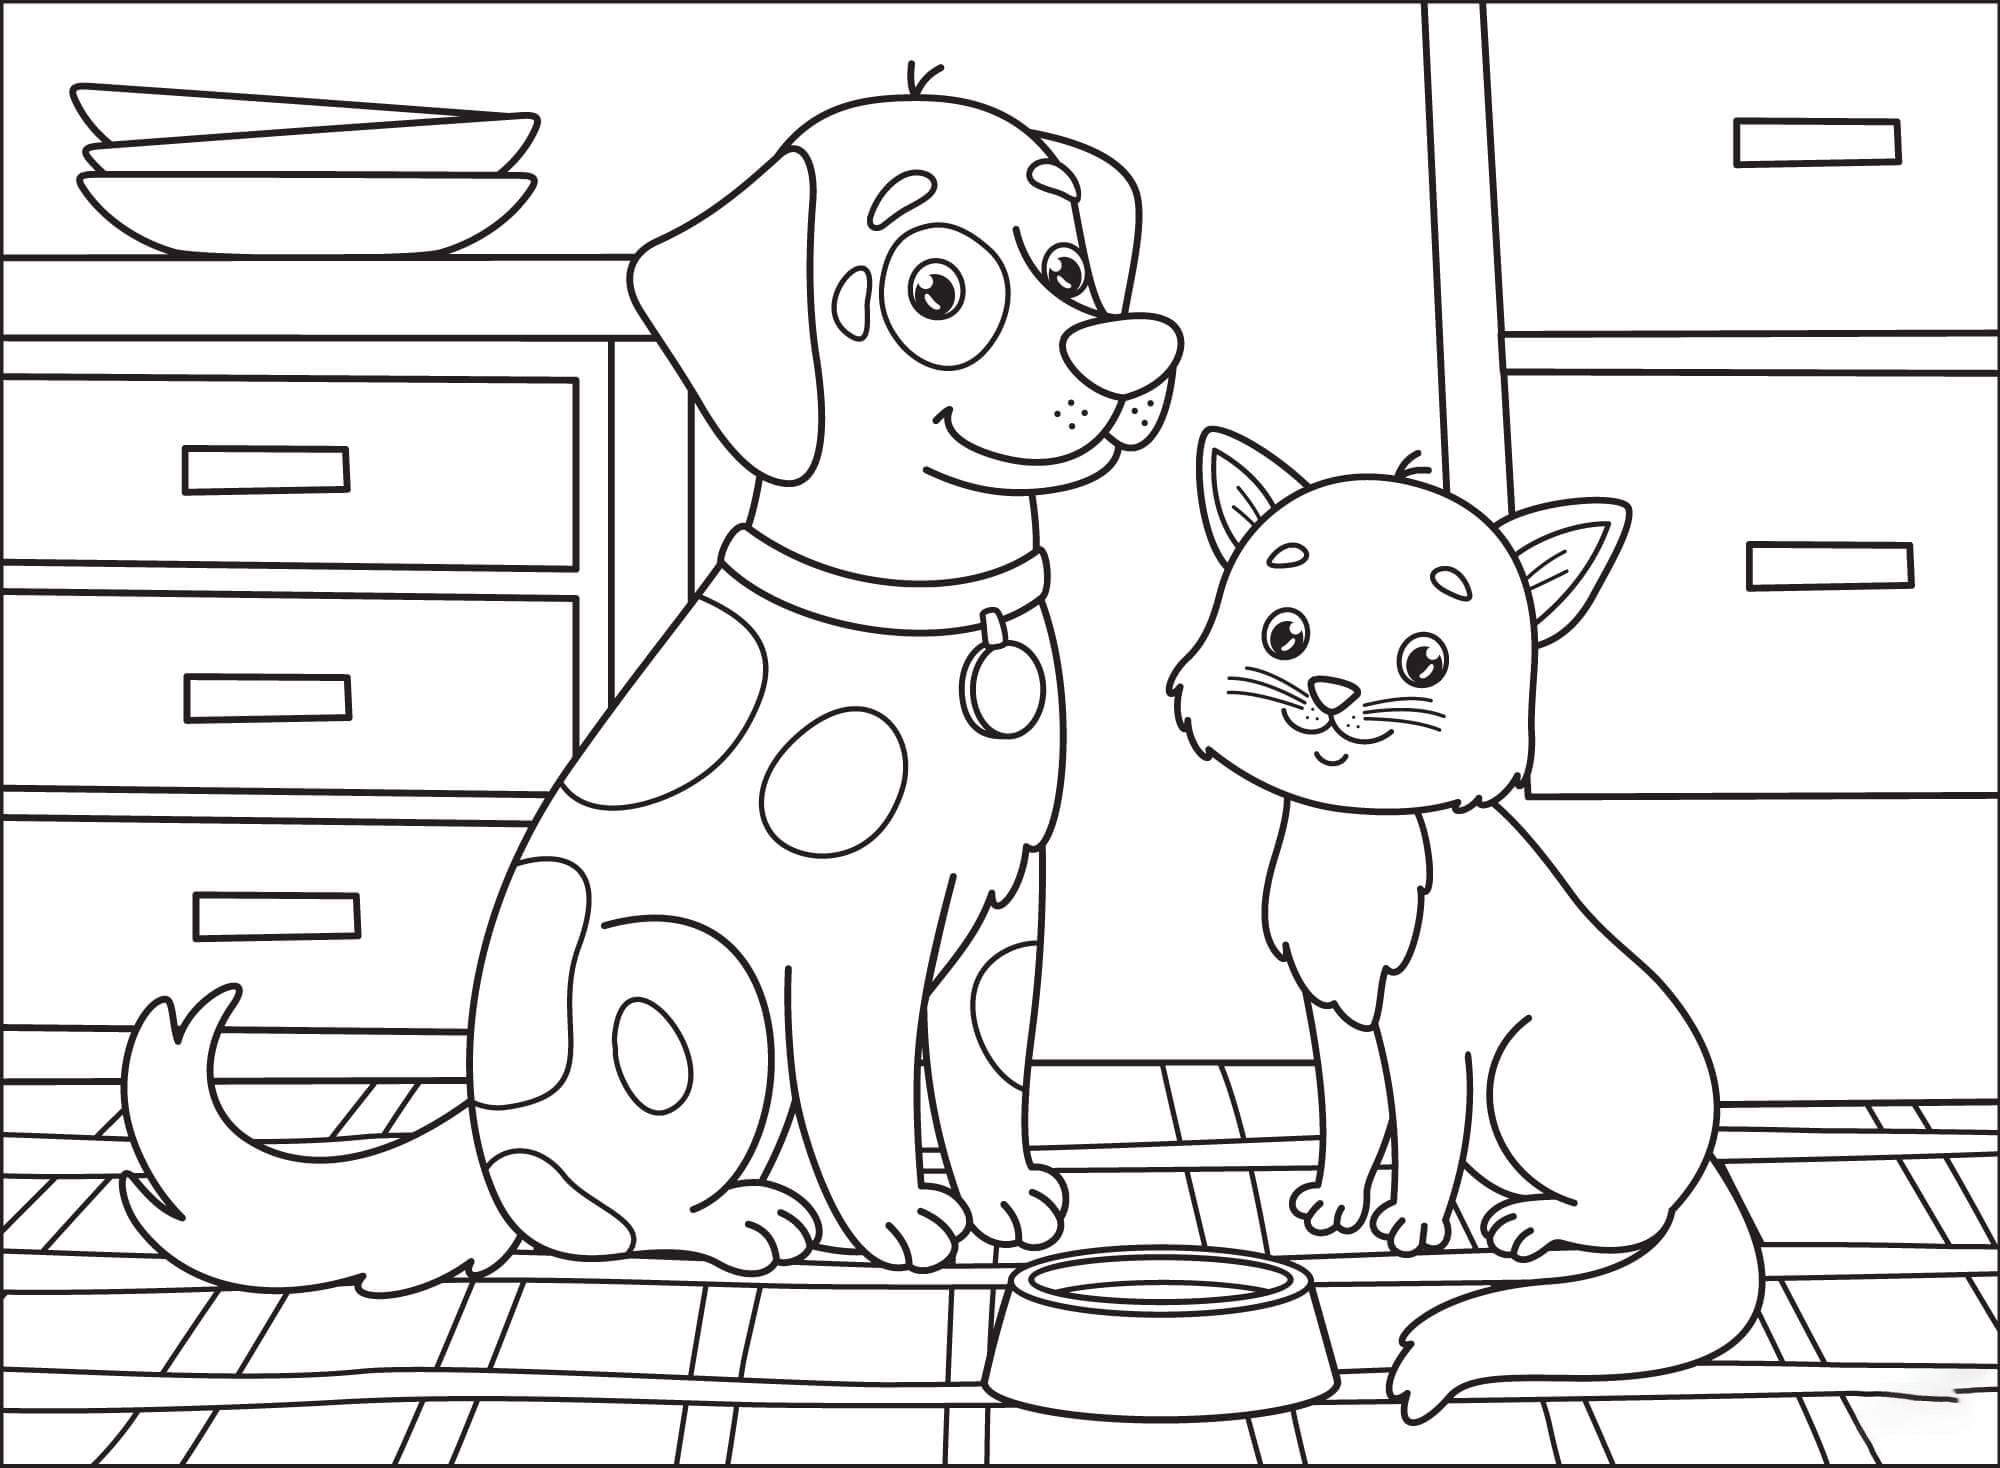 dog-coloring-pages-coloring-pages-for-kids-and-adults